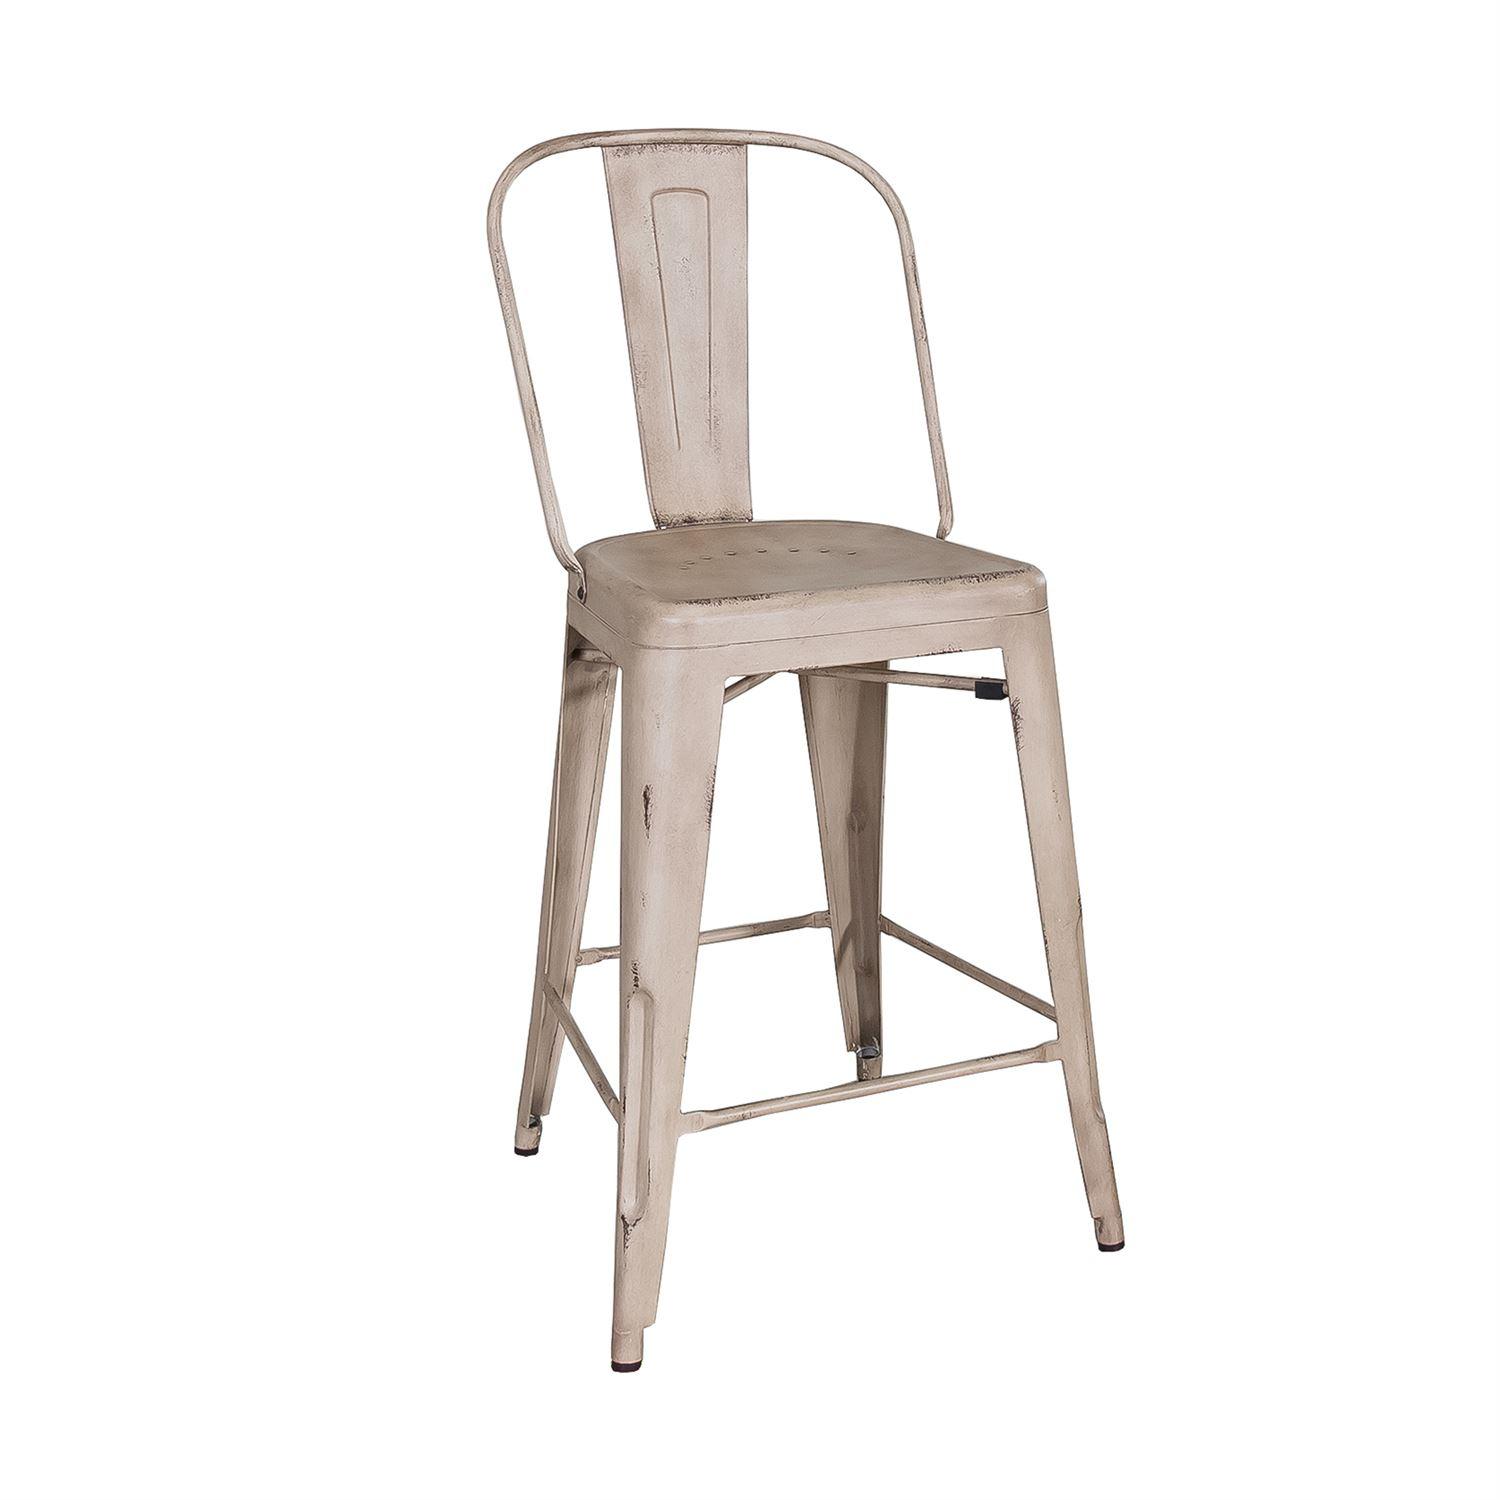 Traditional Counter Chair Vintage Series  (179-CD) Counter Chair 179-B350524-W in Cream, Gray Metal